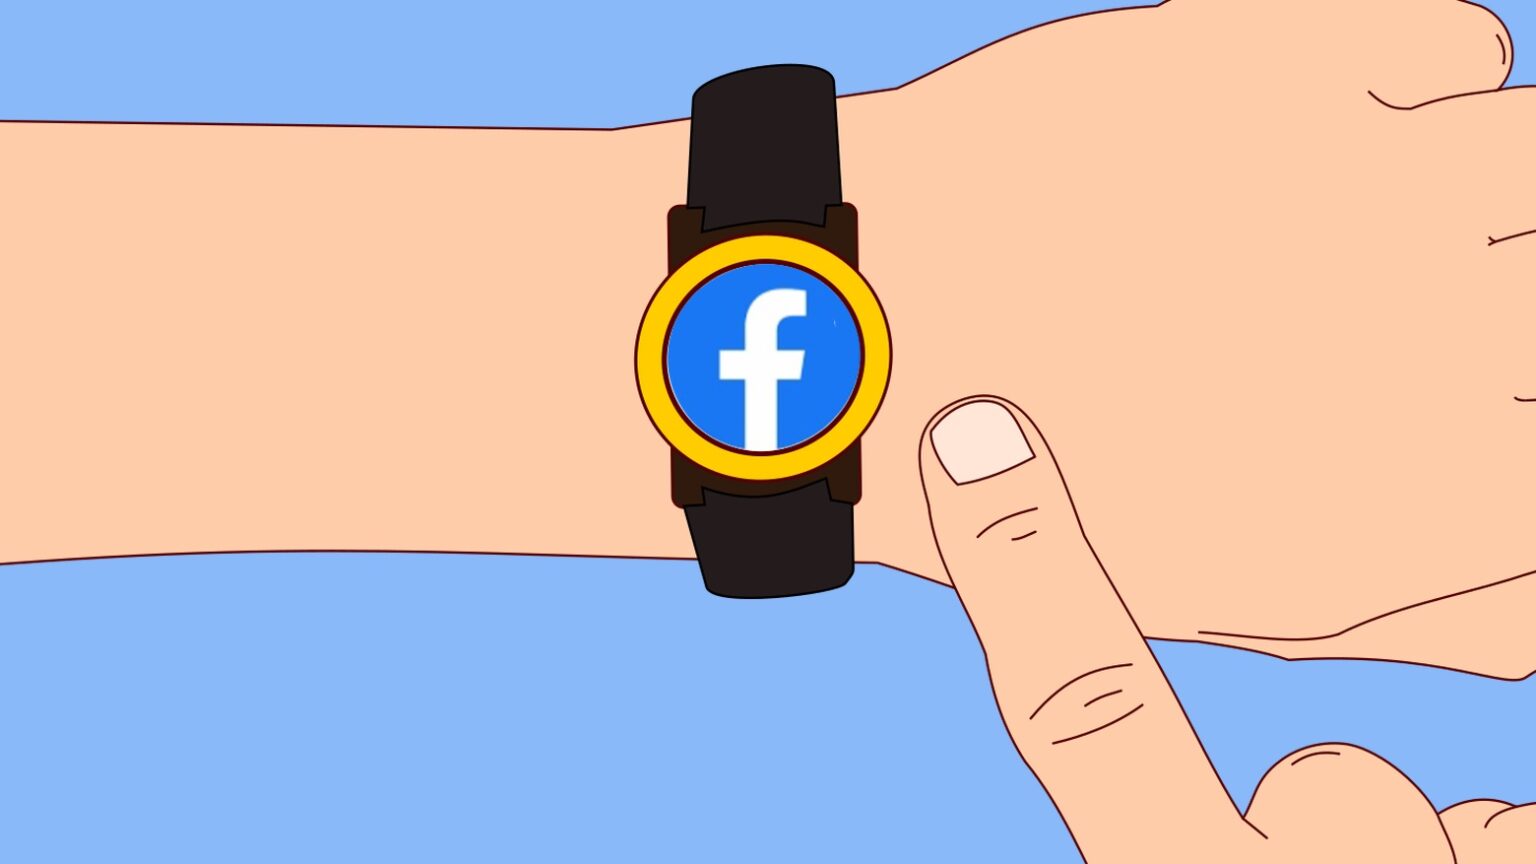 A Facebook watch will likely give new meaning to the word “watch.”